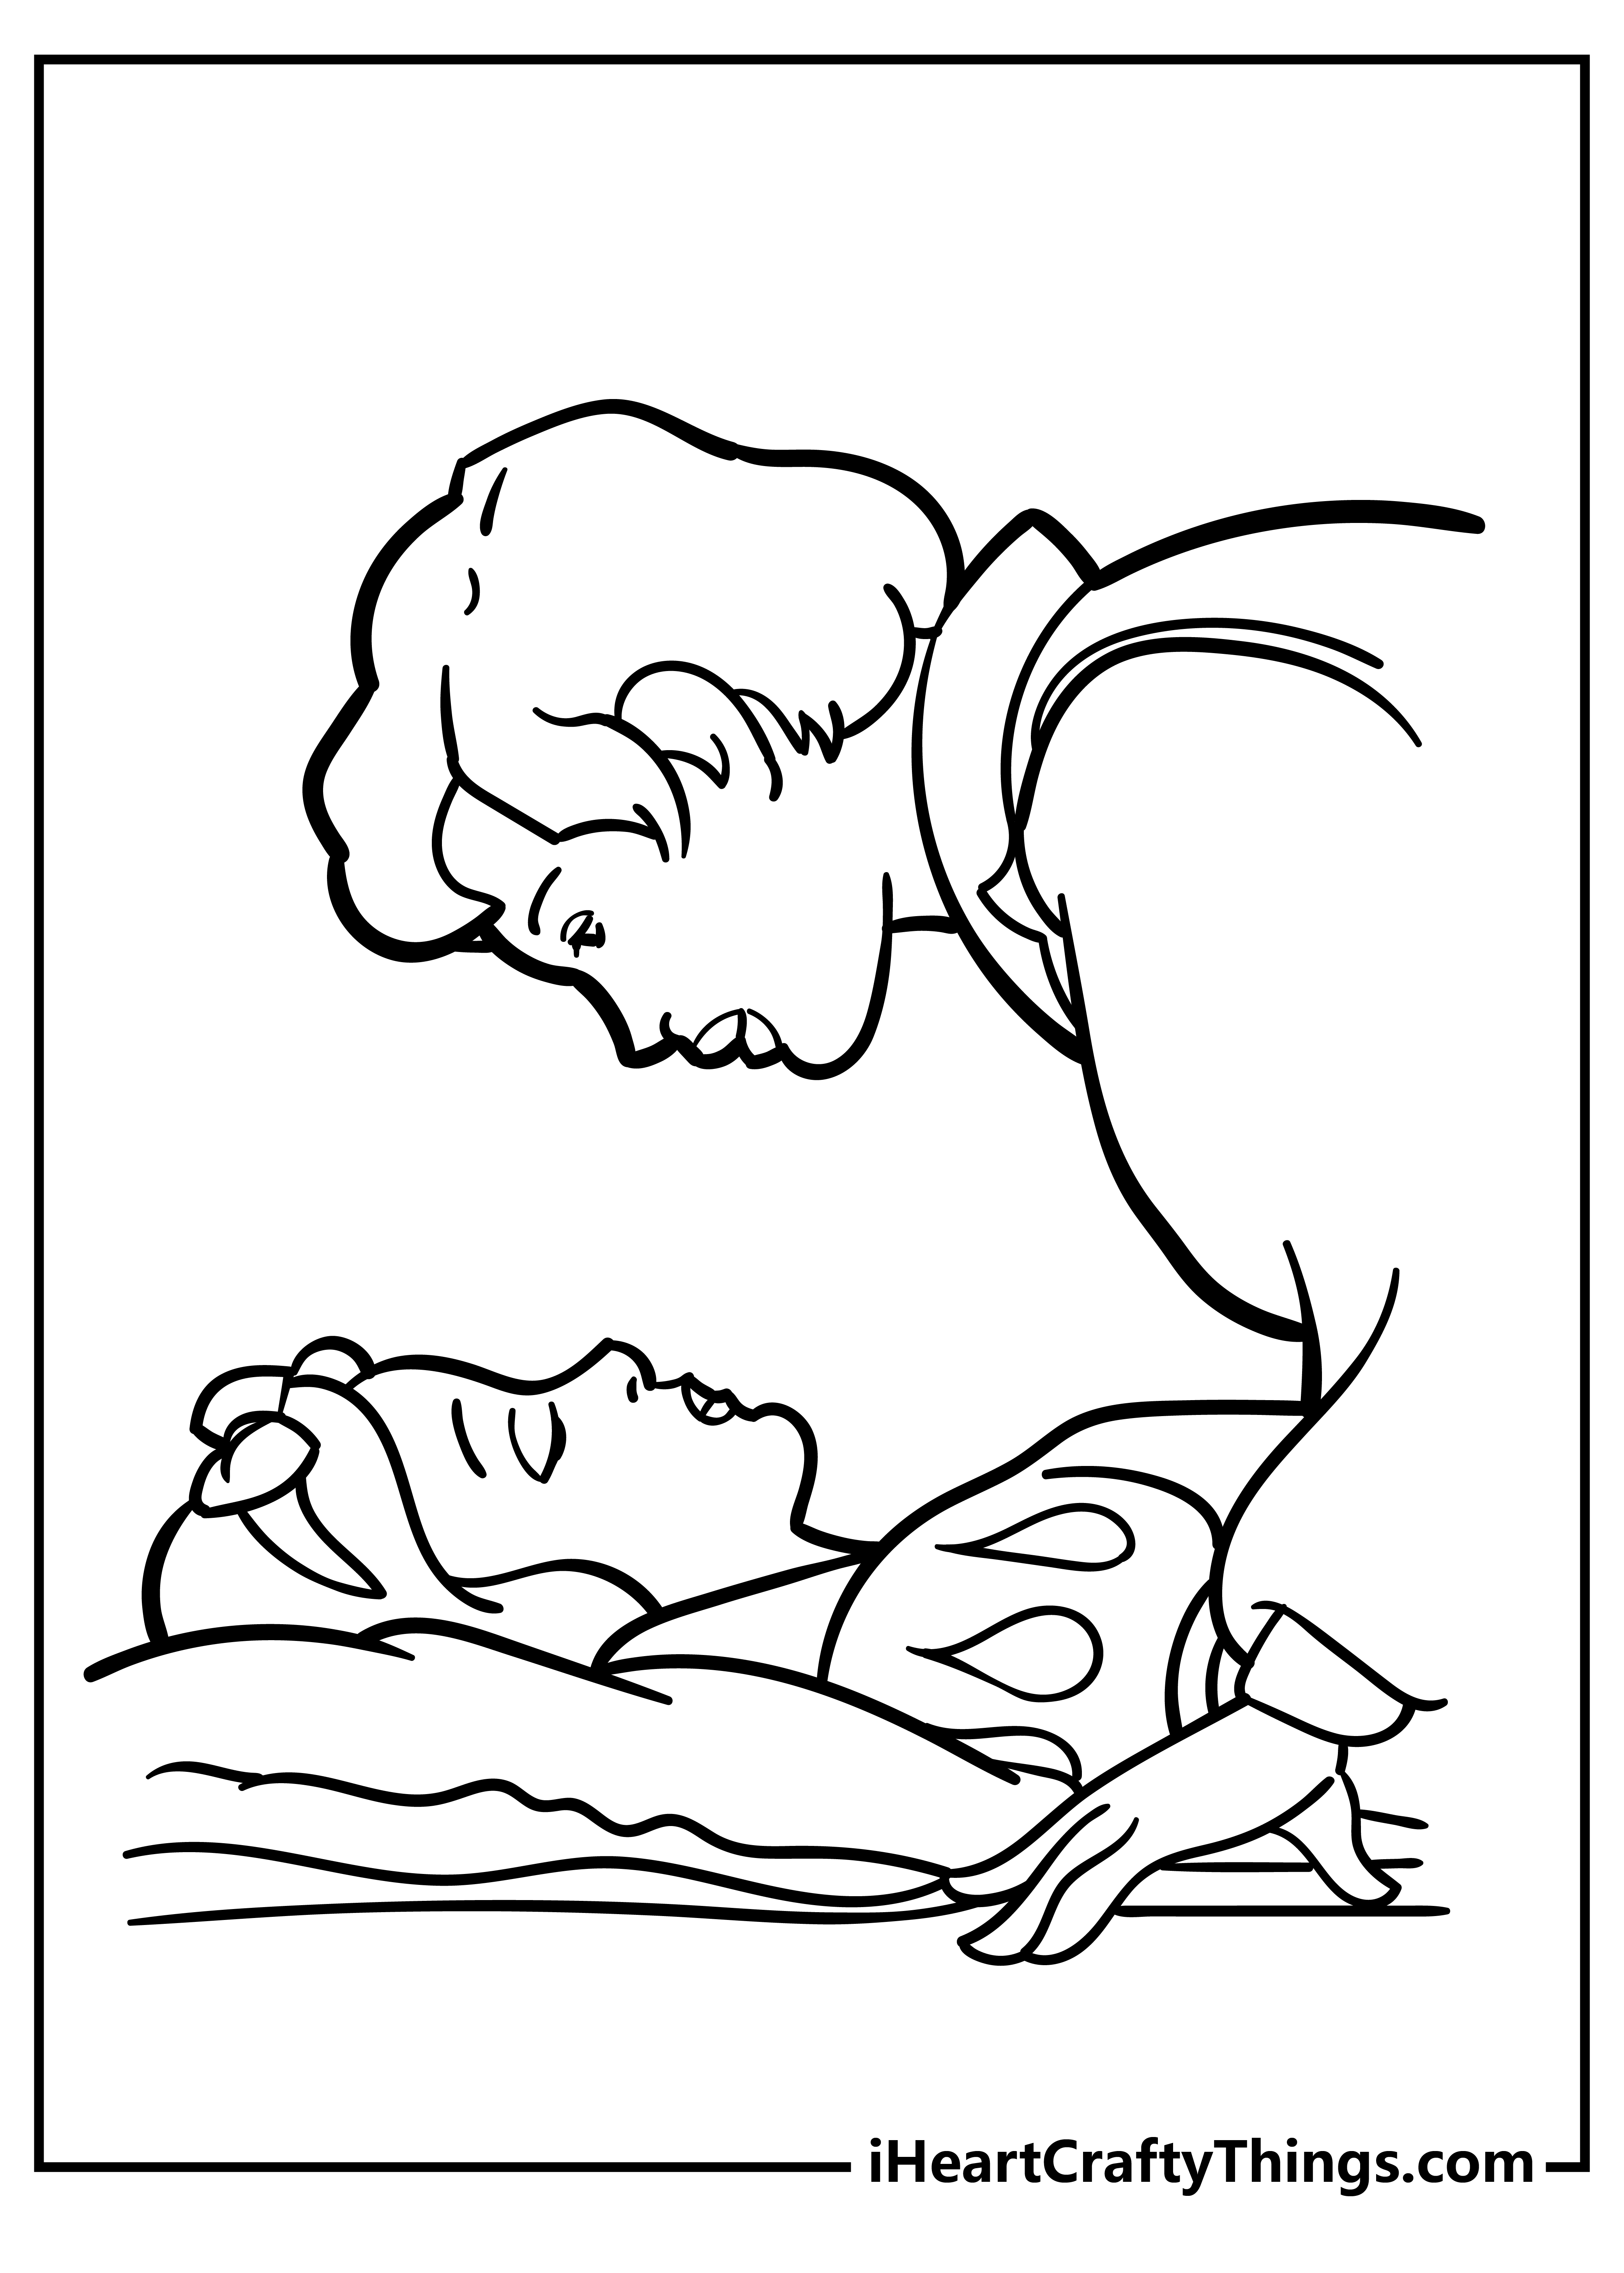 Snow White Coloring Pages for adults free printable